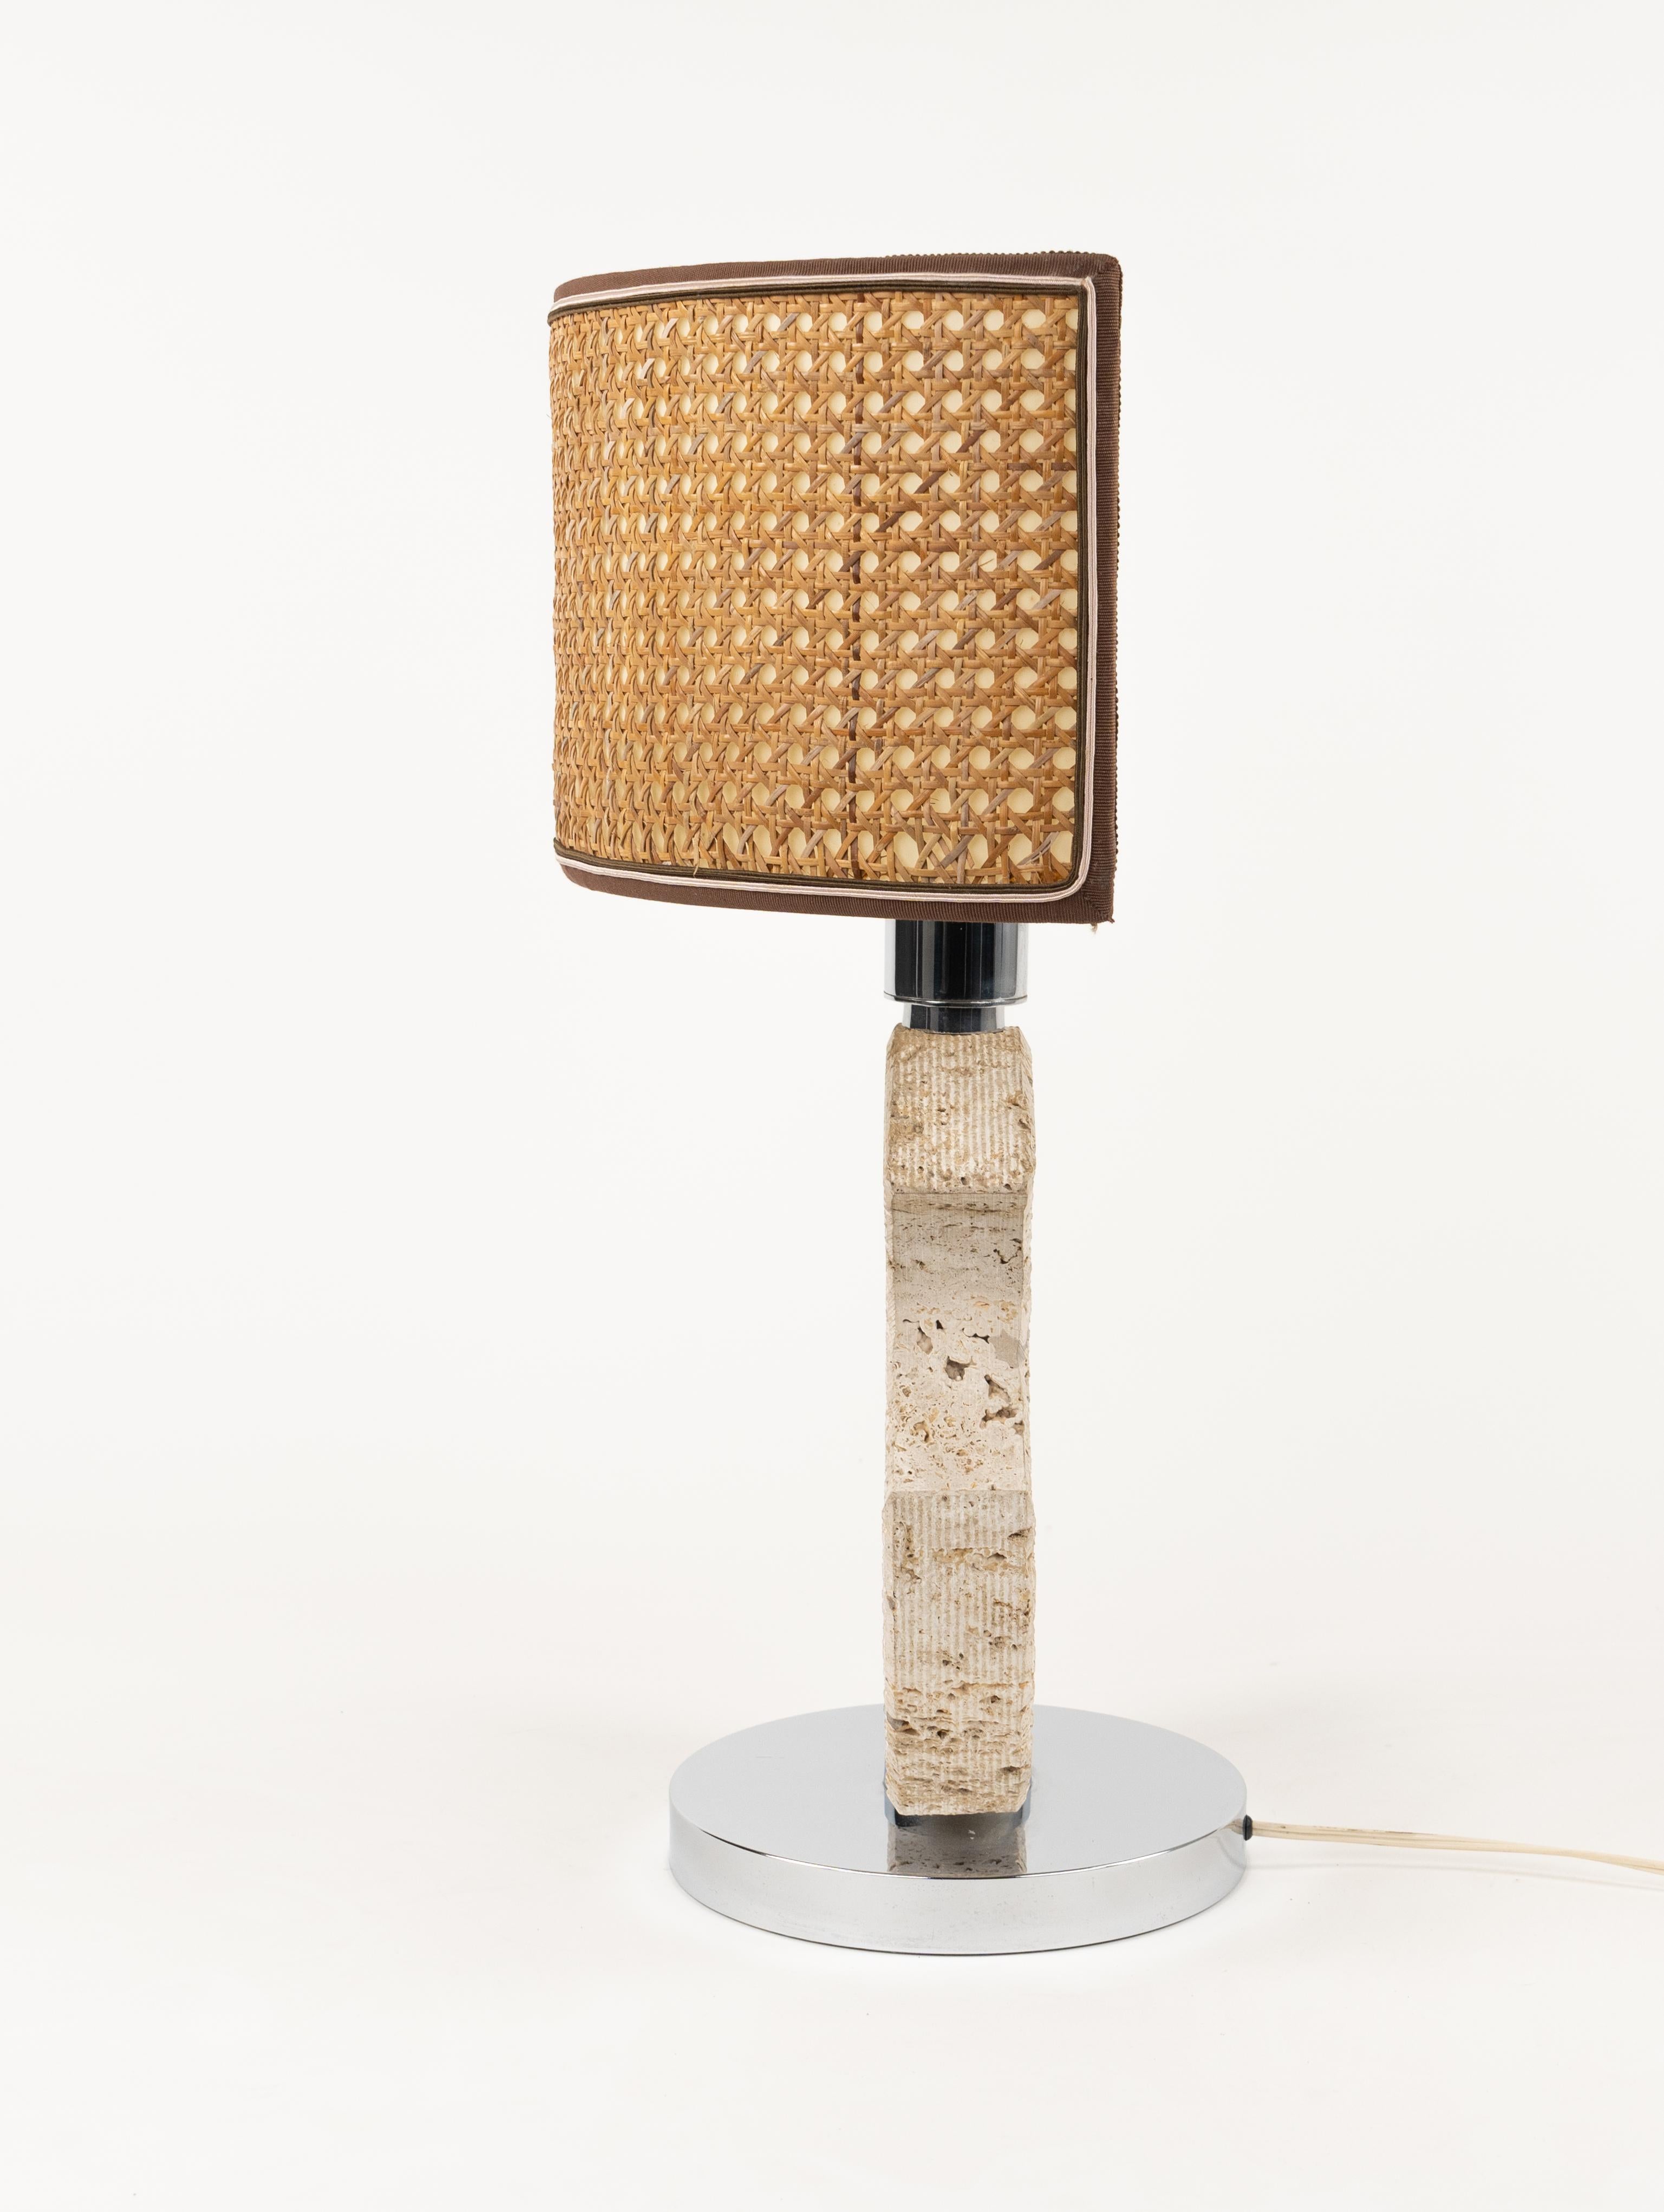 Late 20th Century Midcentury Table Lamp in Travertine and Chrome by Studio CE. VA. Italy 1970s For Sale